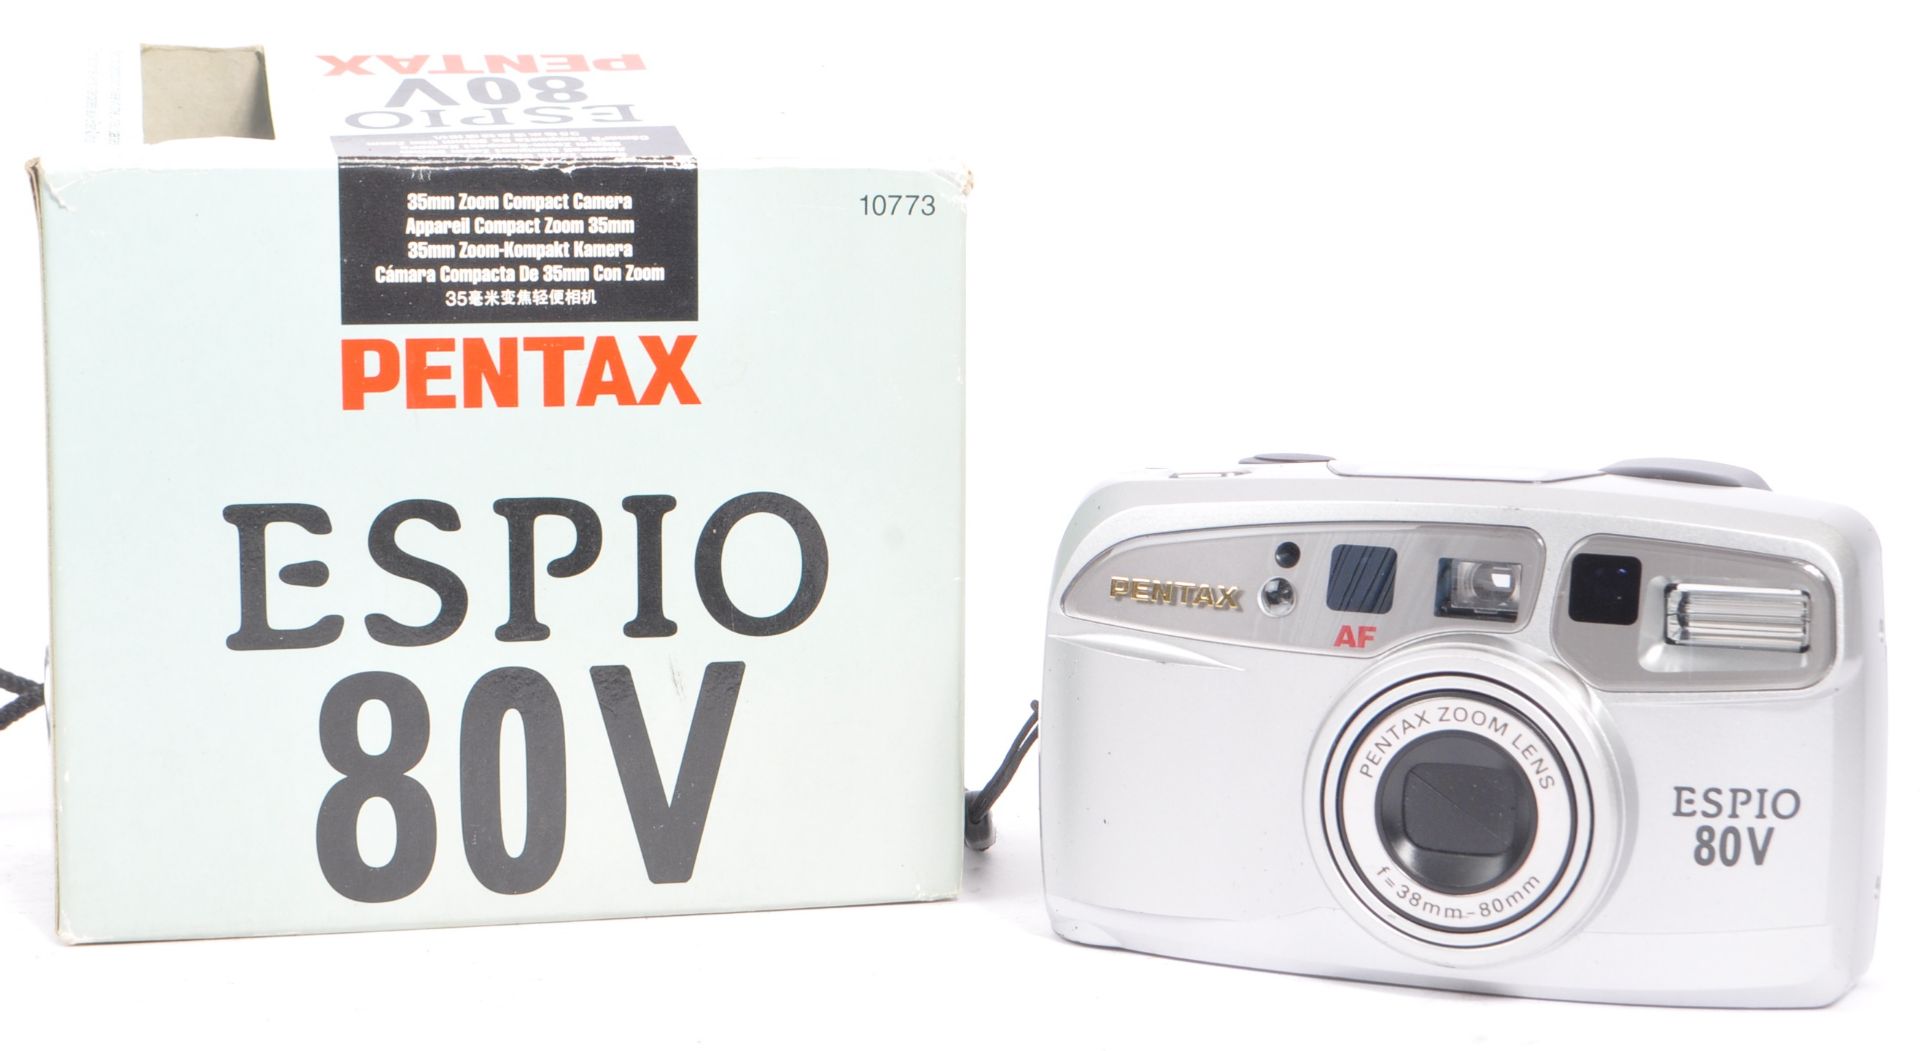 COLLECTION OF LATE 20TH CENTURY PENTAX COMPACT CAMERAS - Image 6 of 7